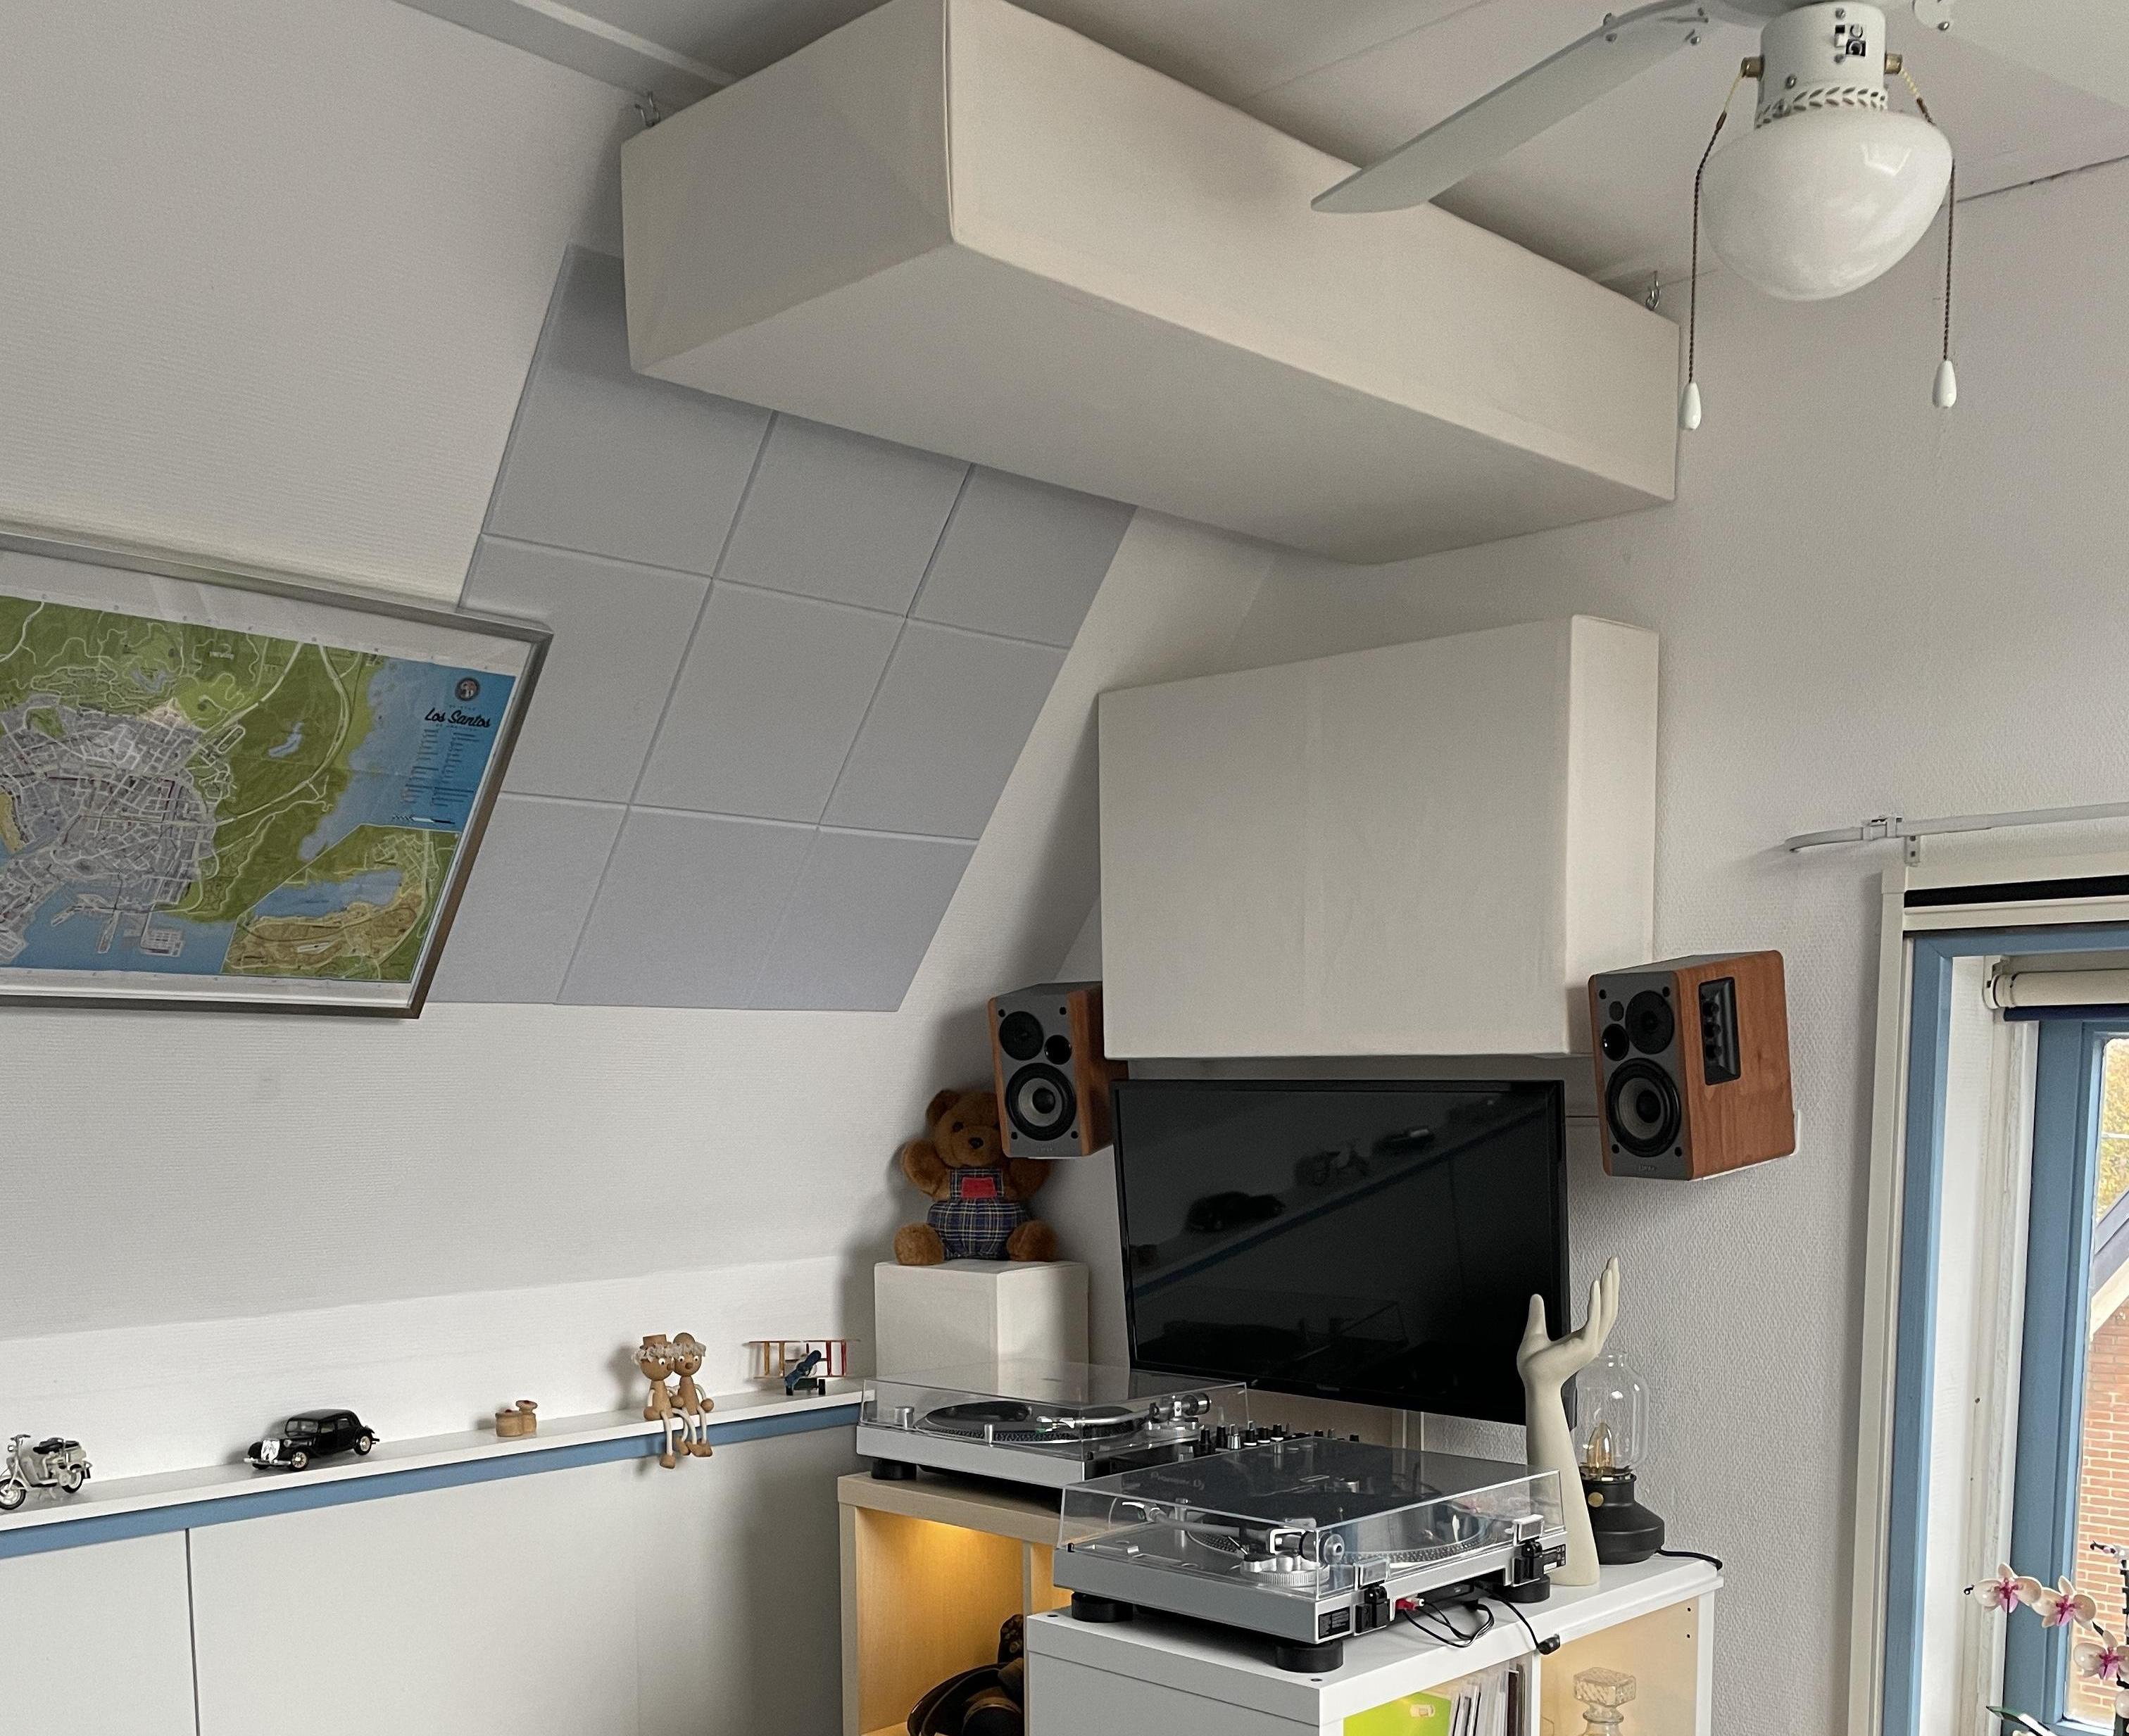 Improving Acoustics in an Existing Room